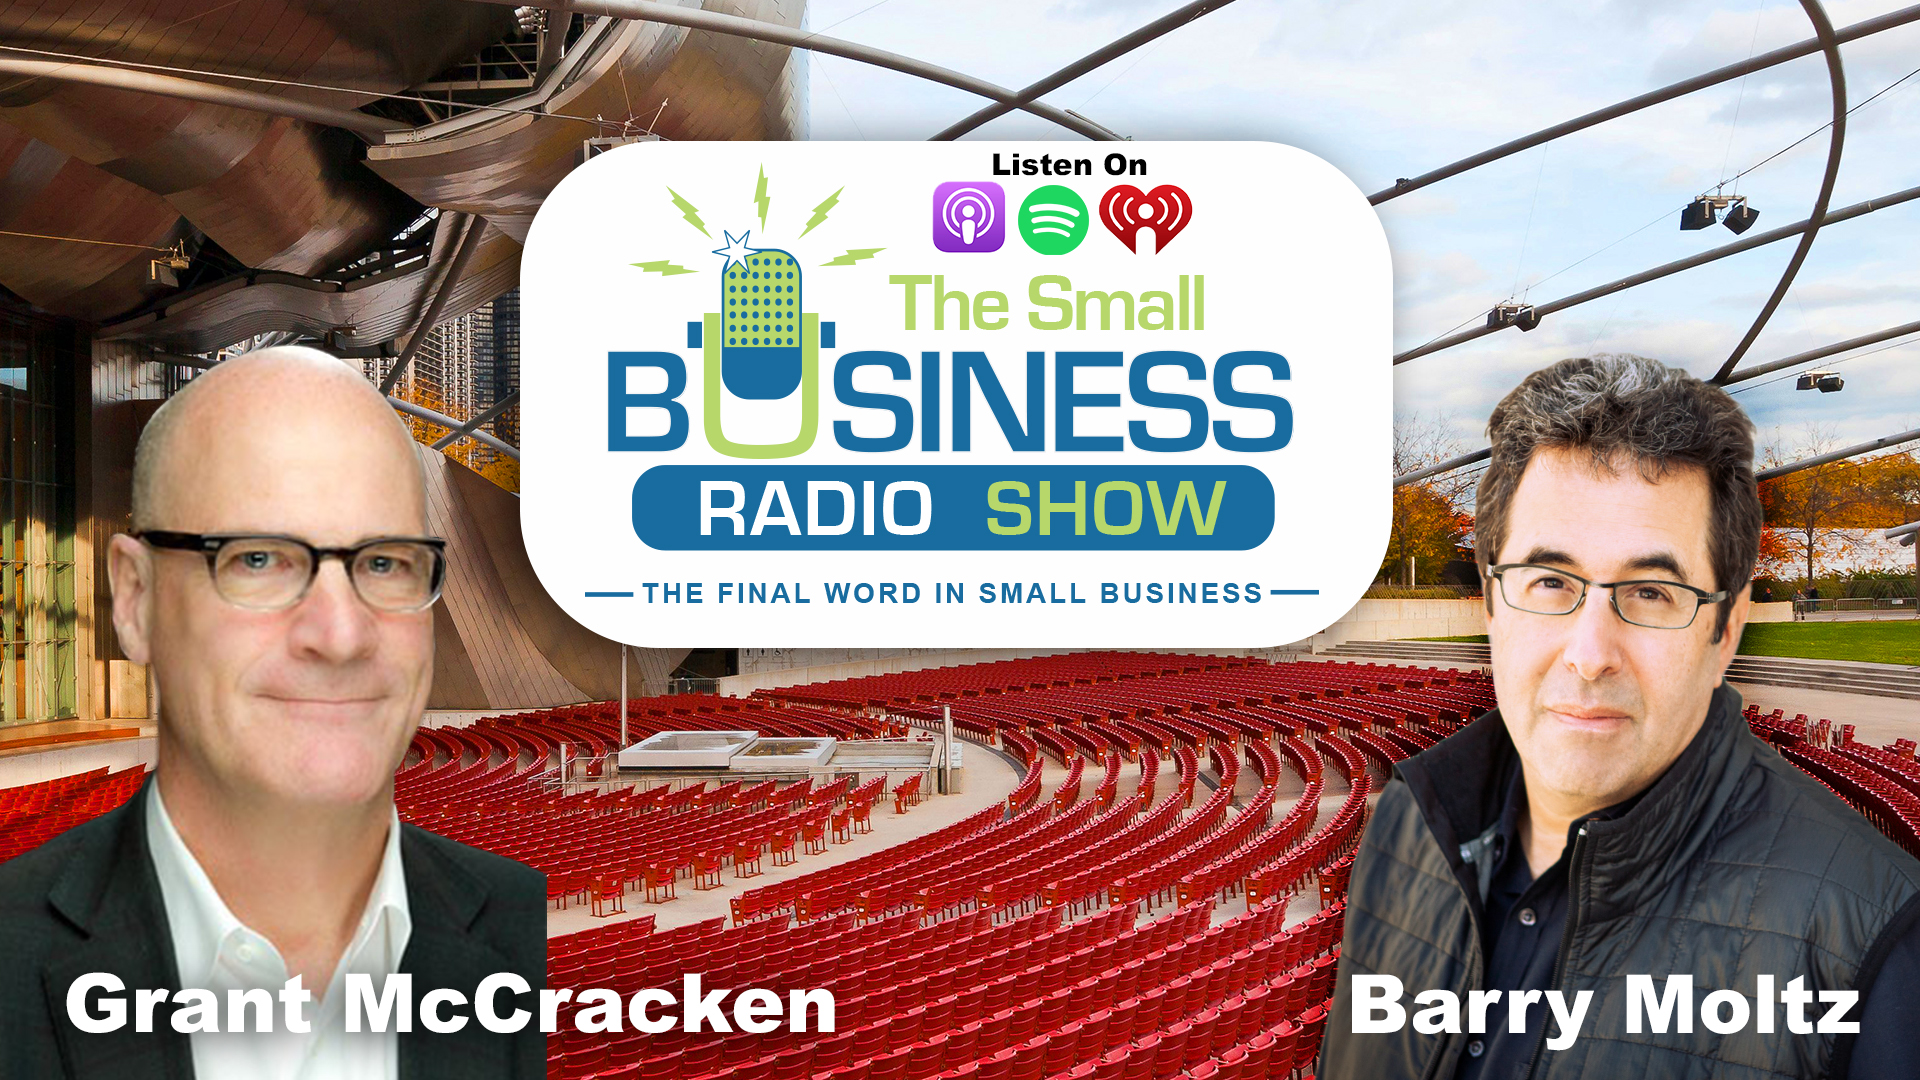 Grant McCracken on The Small Business Radio Show